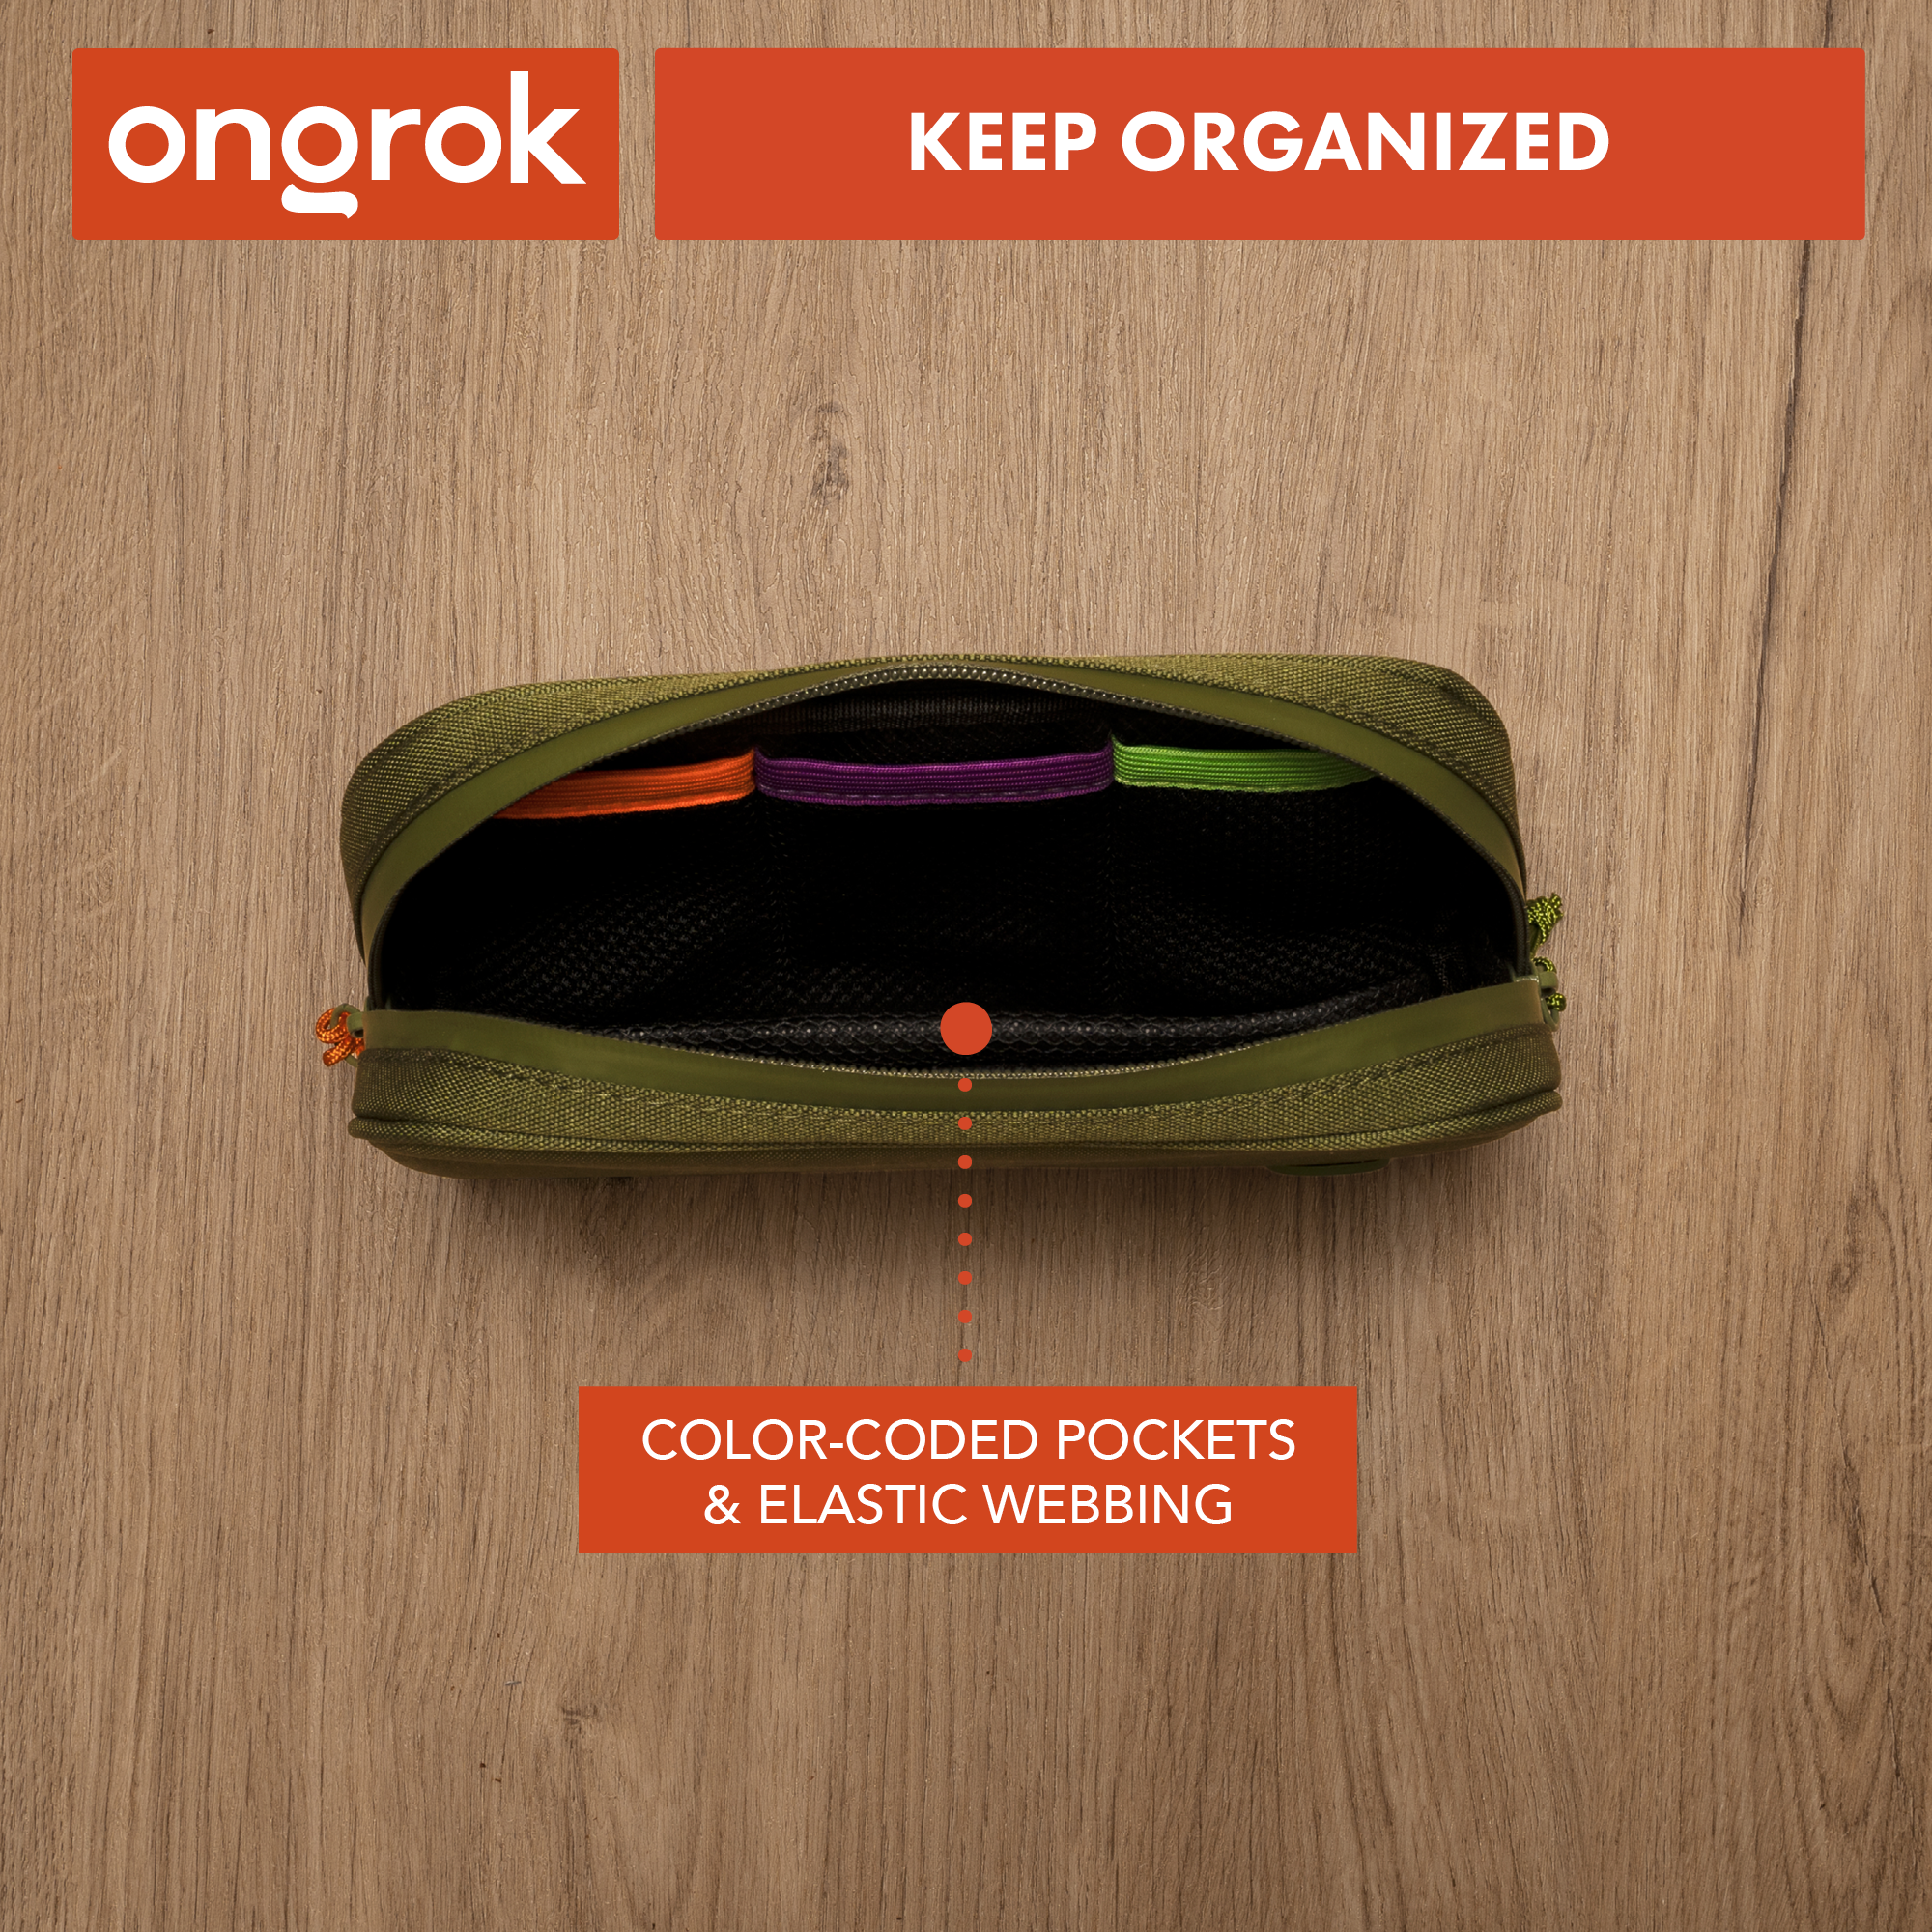 Ongrok Carbon-lined Wallets with Combination Lock V 2.0 | 3" Sizes (Small, Medium, Large)